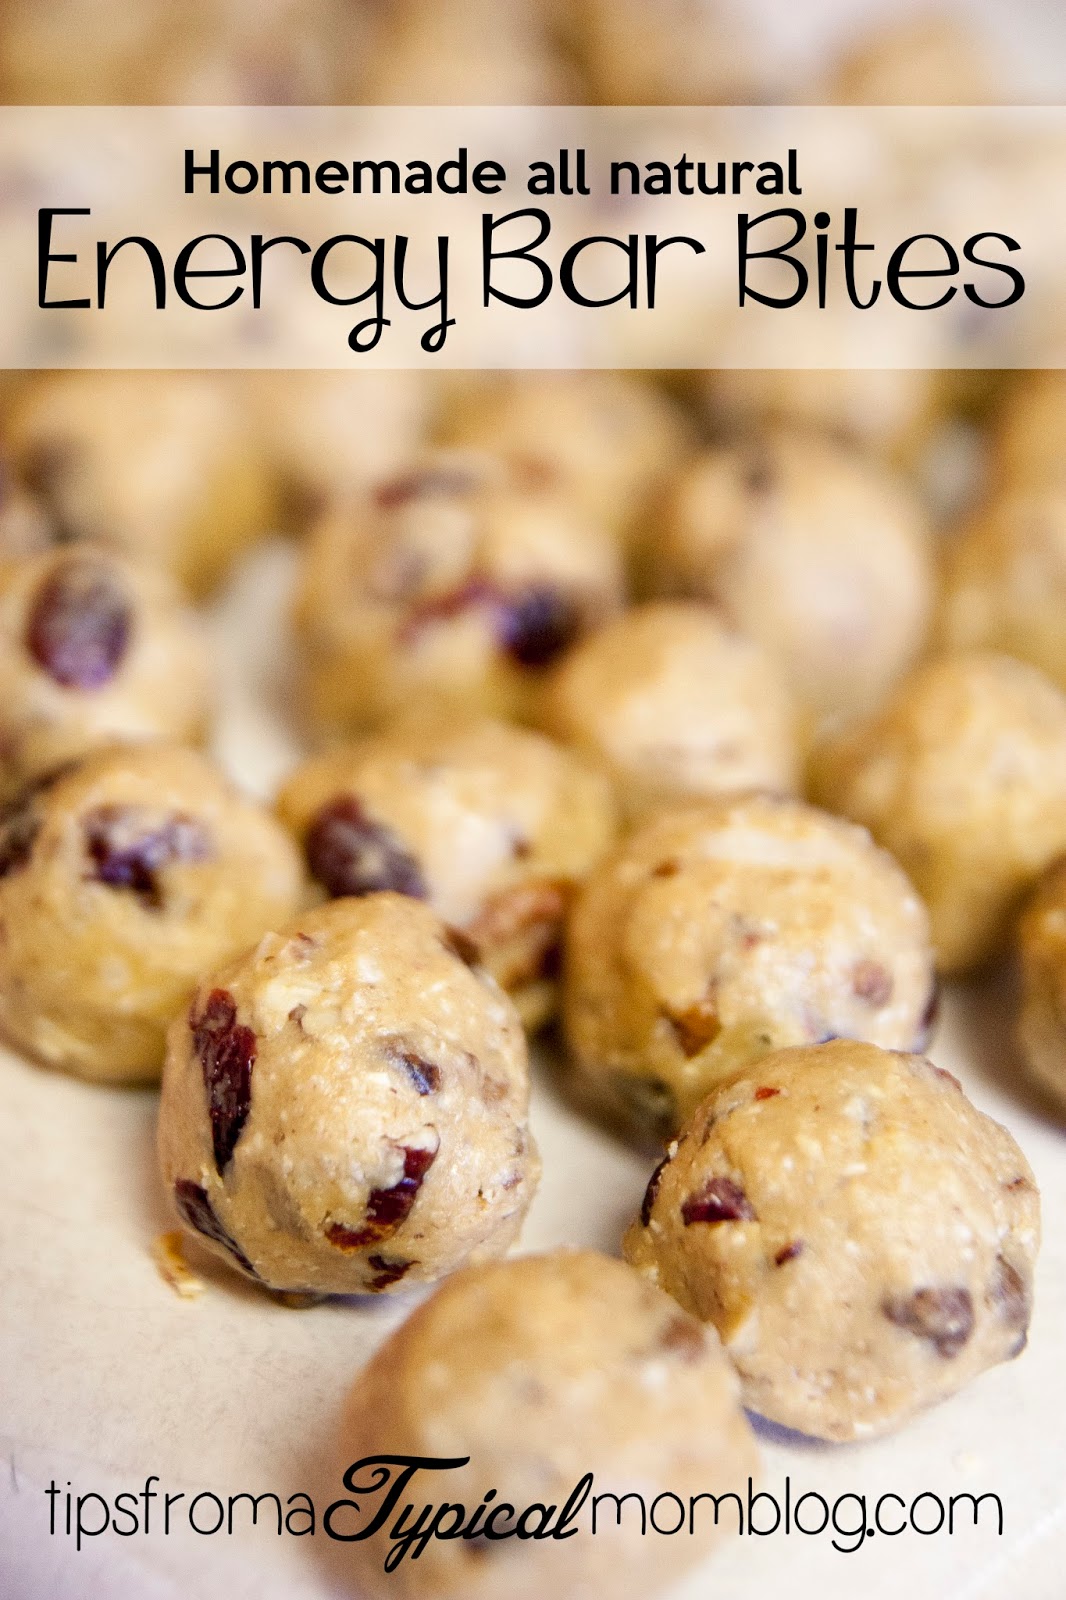 Protein Energy Bar Bites Recipe- Dairy Free, Sugar Free, All Natural